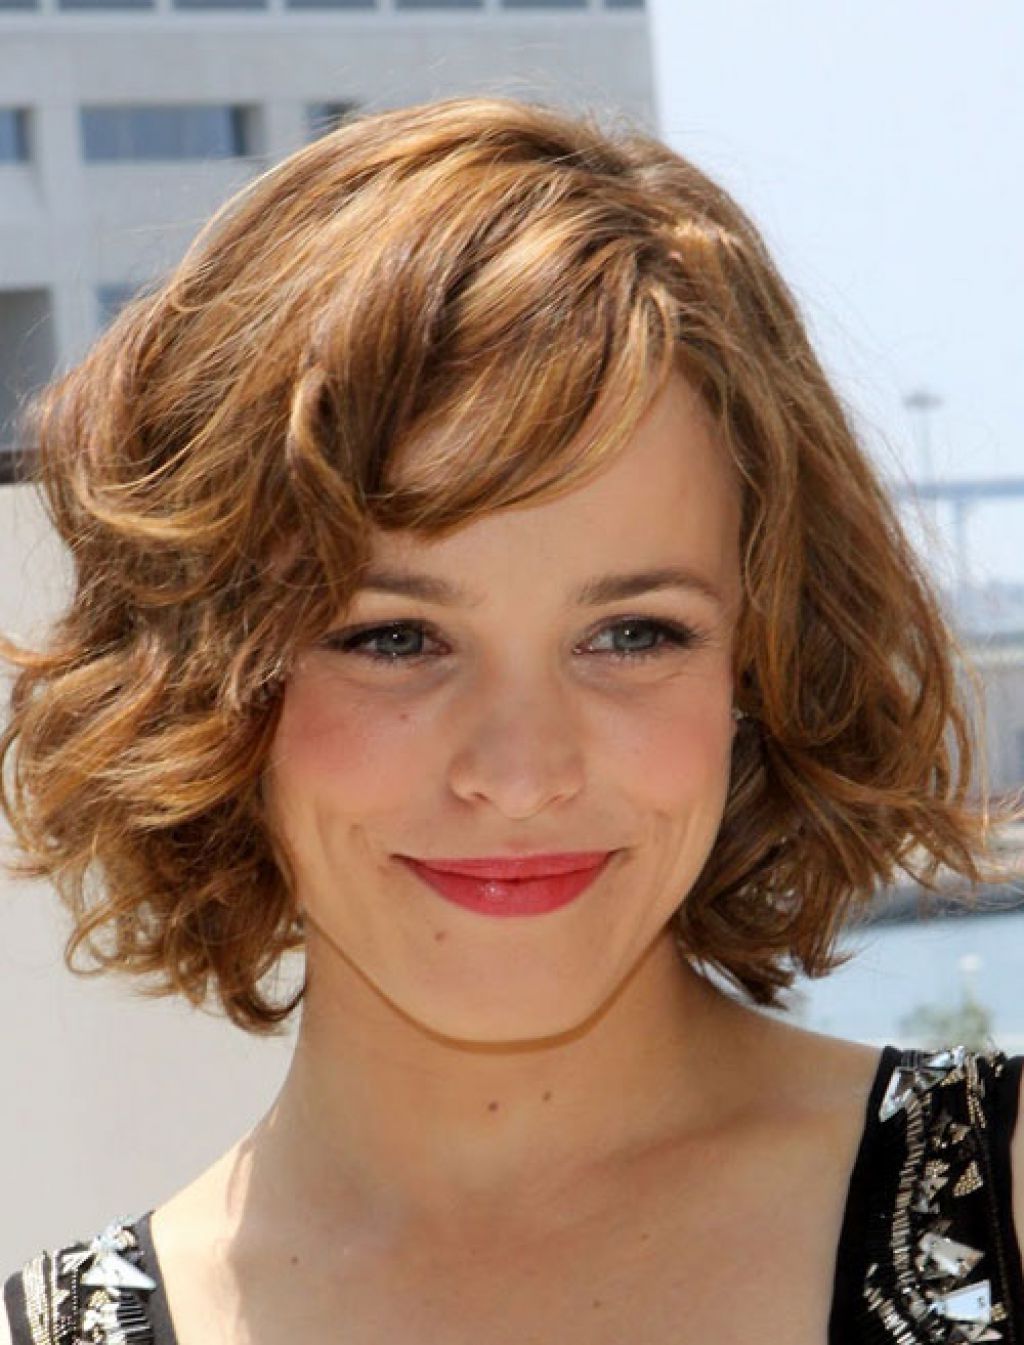 12 Formal Hairstyles For Short Hair You Can't Do Without Intended For Recent Pixie Hairstyles With Curly Hair (View 19 of 33)